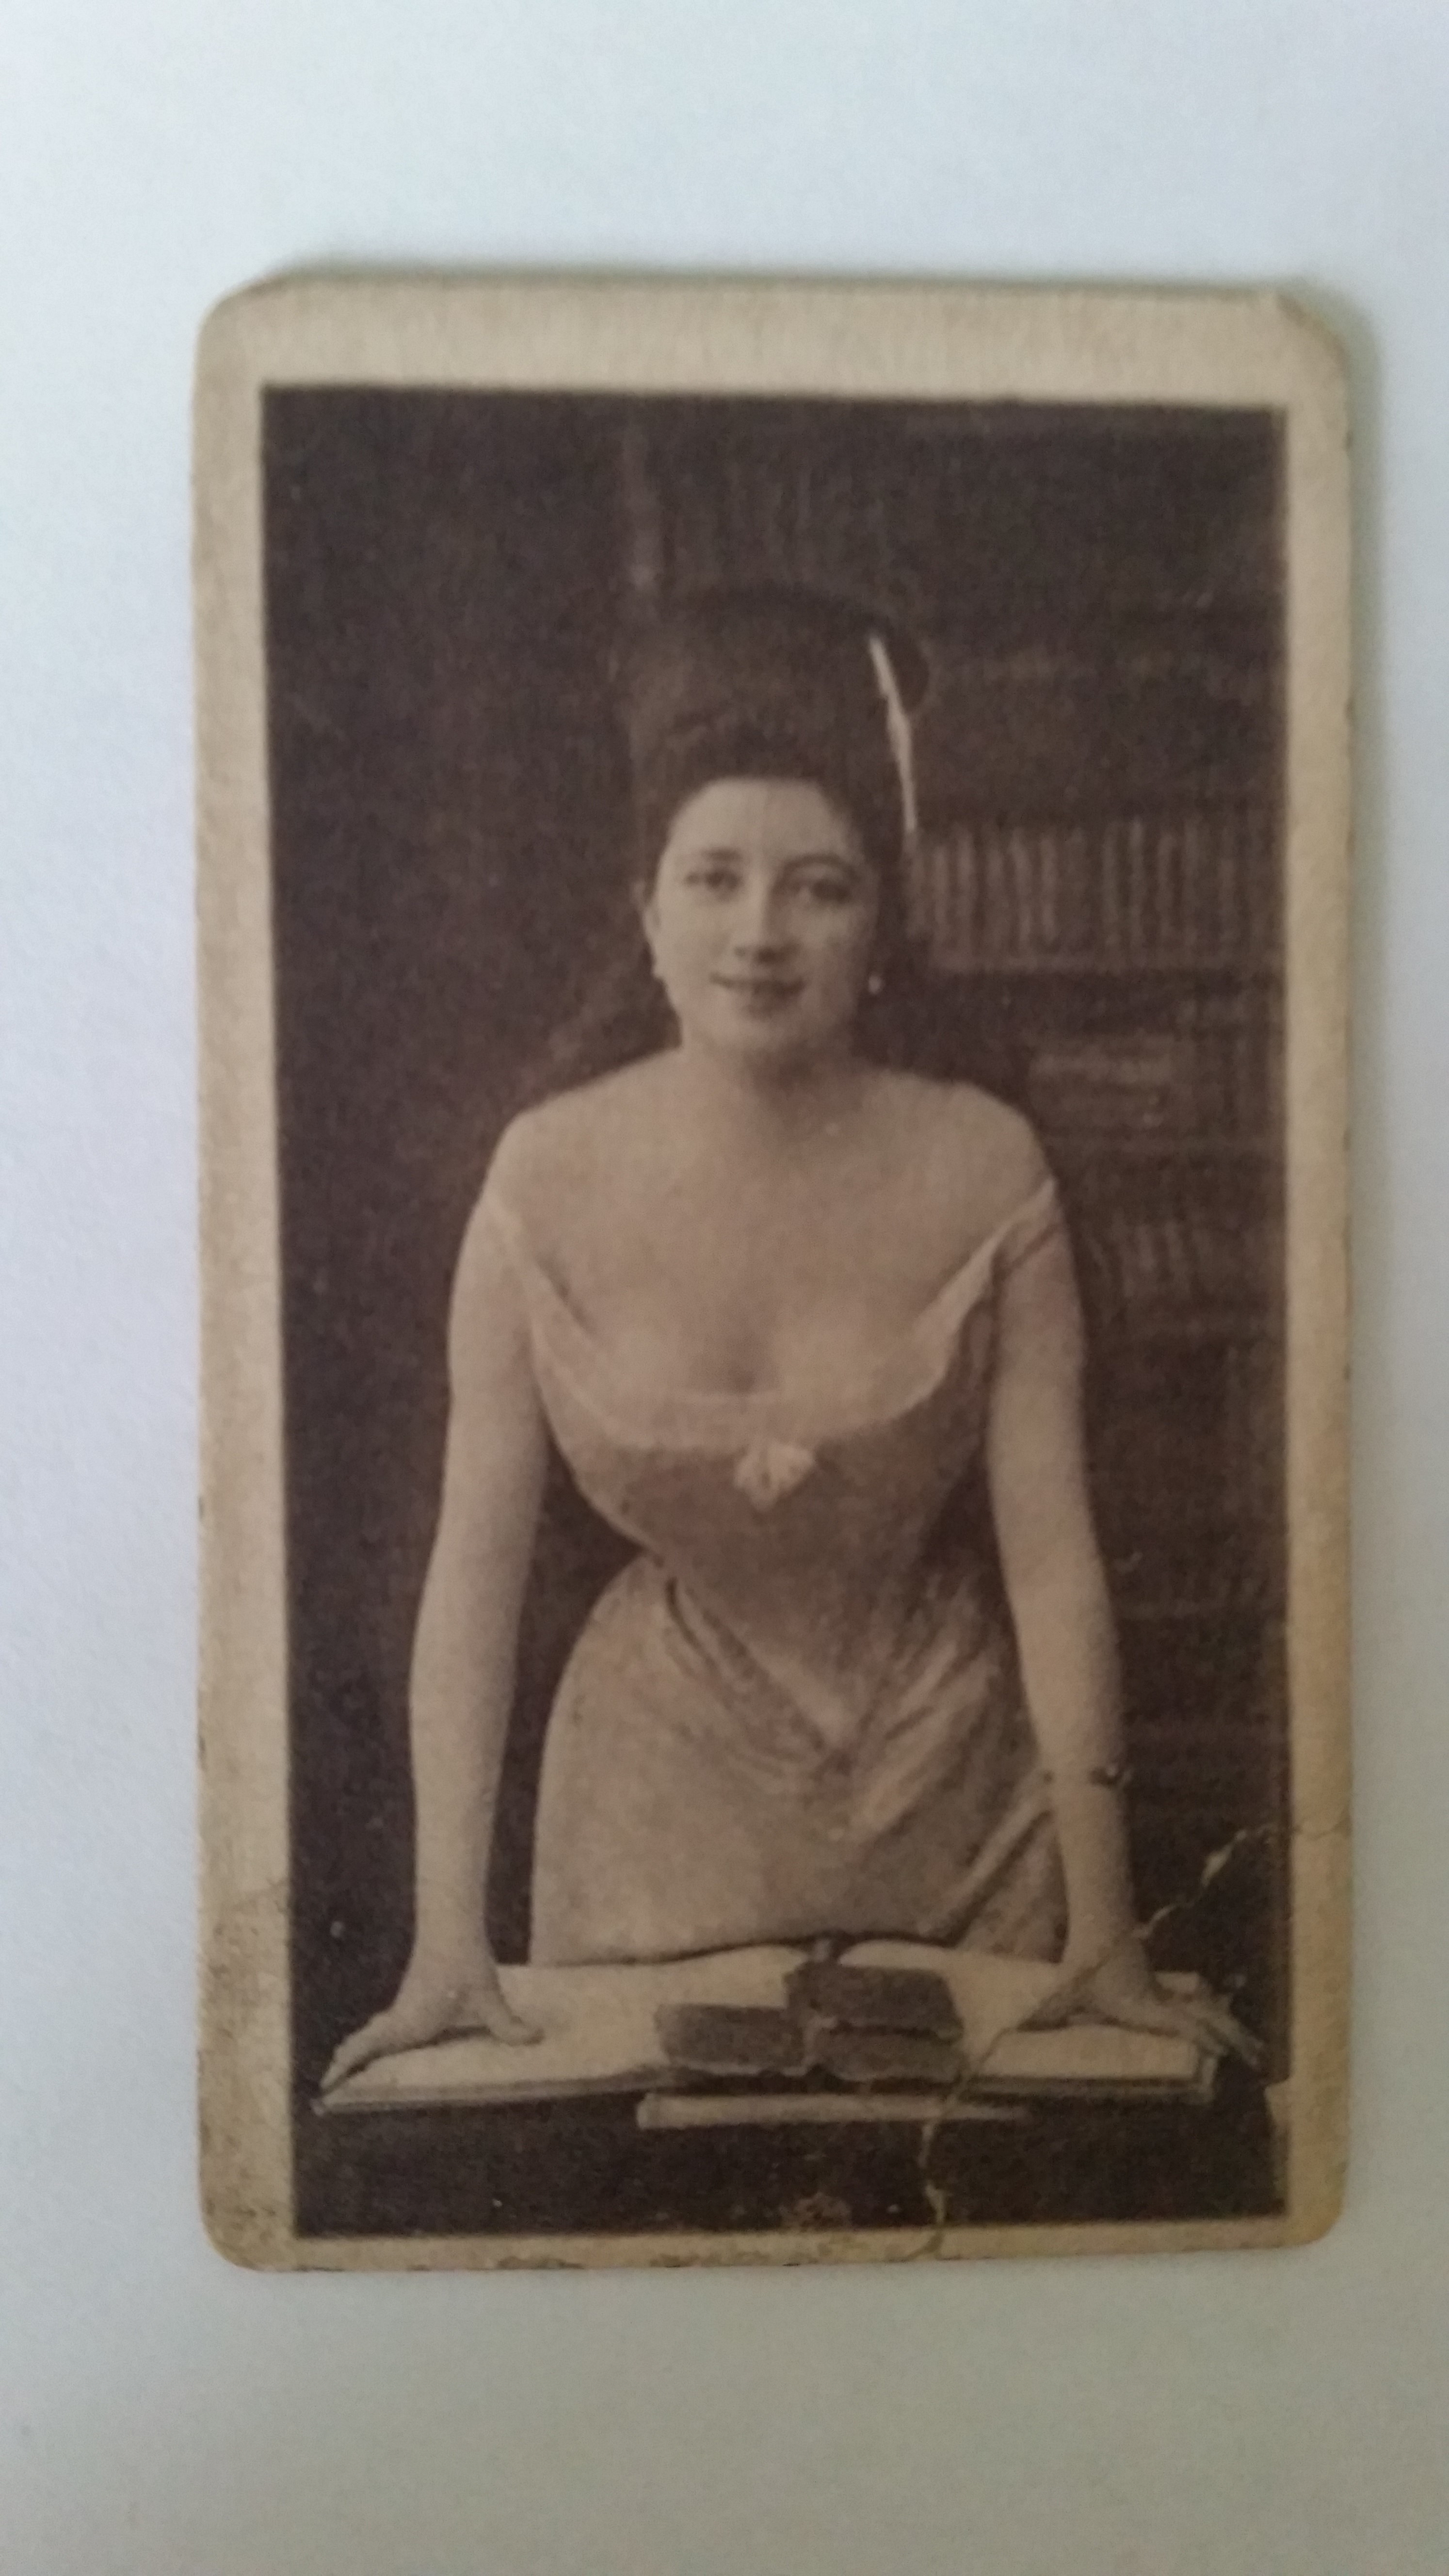 ROBINSON & BARNSDALE, Beauties (collotype), CSGB ref. H377, girl leaning on desk, black back, corner